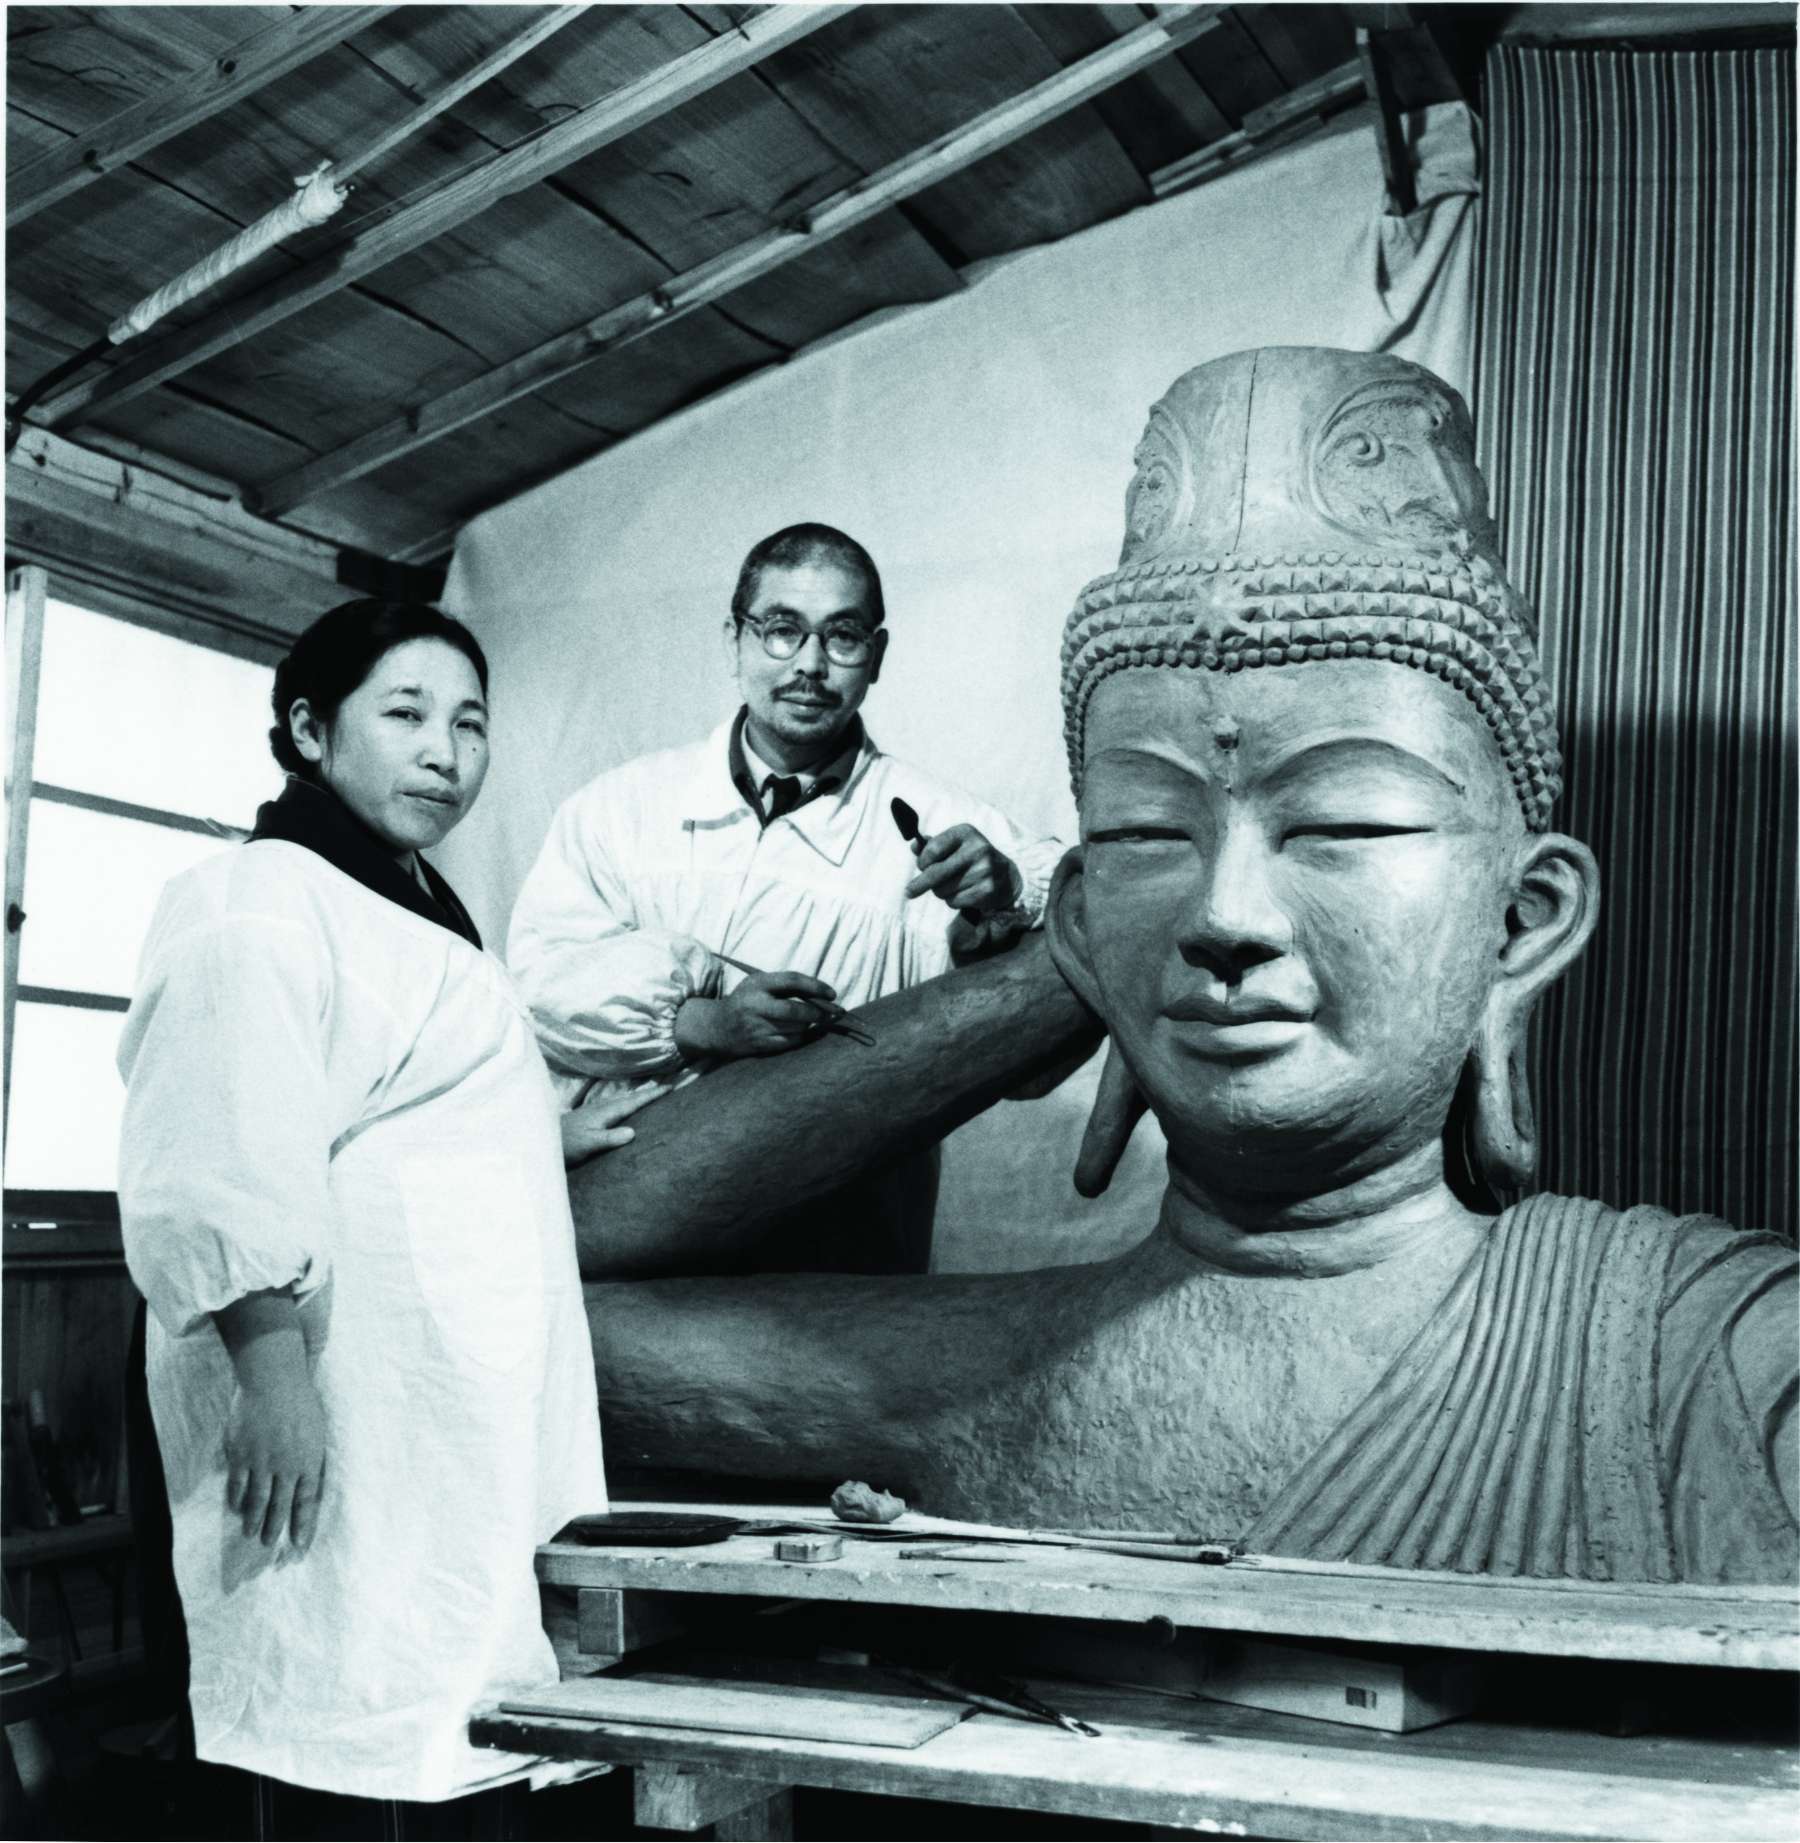 Shinjo, with sculpting implements in hand, and Tomoji, both wearing smocks over their clothing, stand in a studio next to a very large sculpted bust of a smiling buddha.